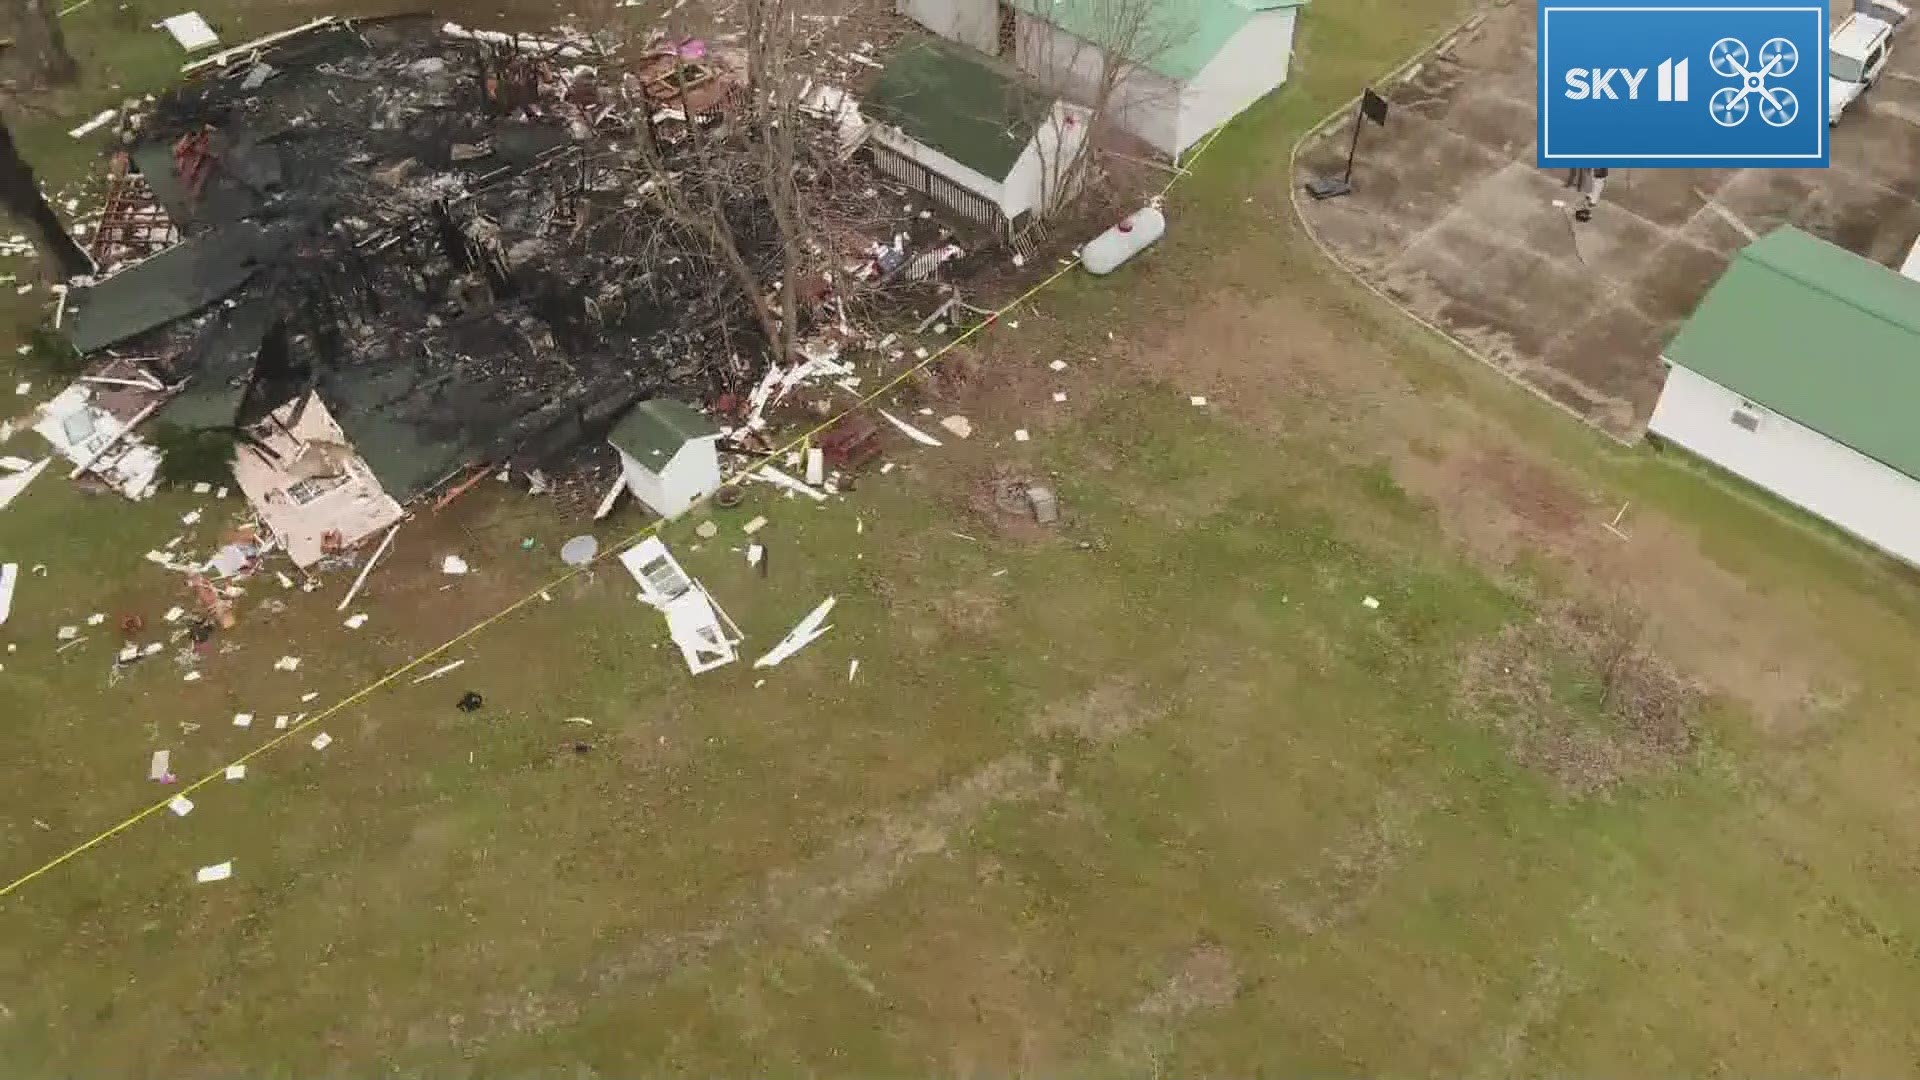 The SKY11 drone captured video of what remains after a gas explosion destroyed a house in Grayson County.